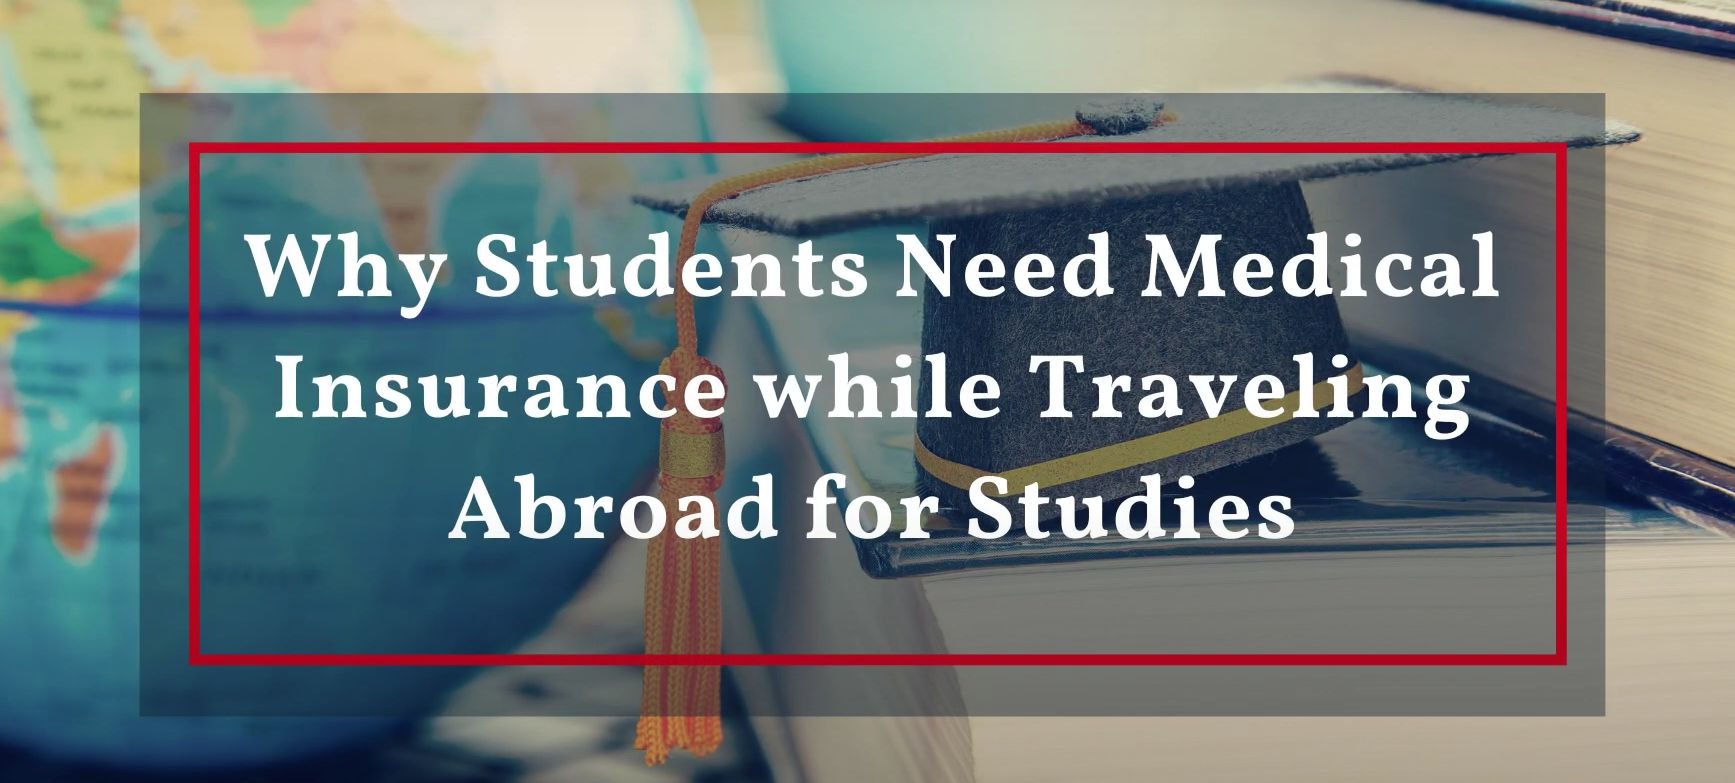 Why Students Need Medical Insurance while Traveling Abroad for Studies - HDFC Sales